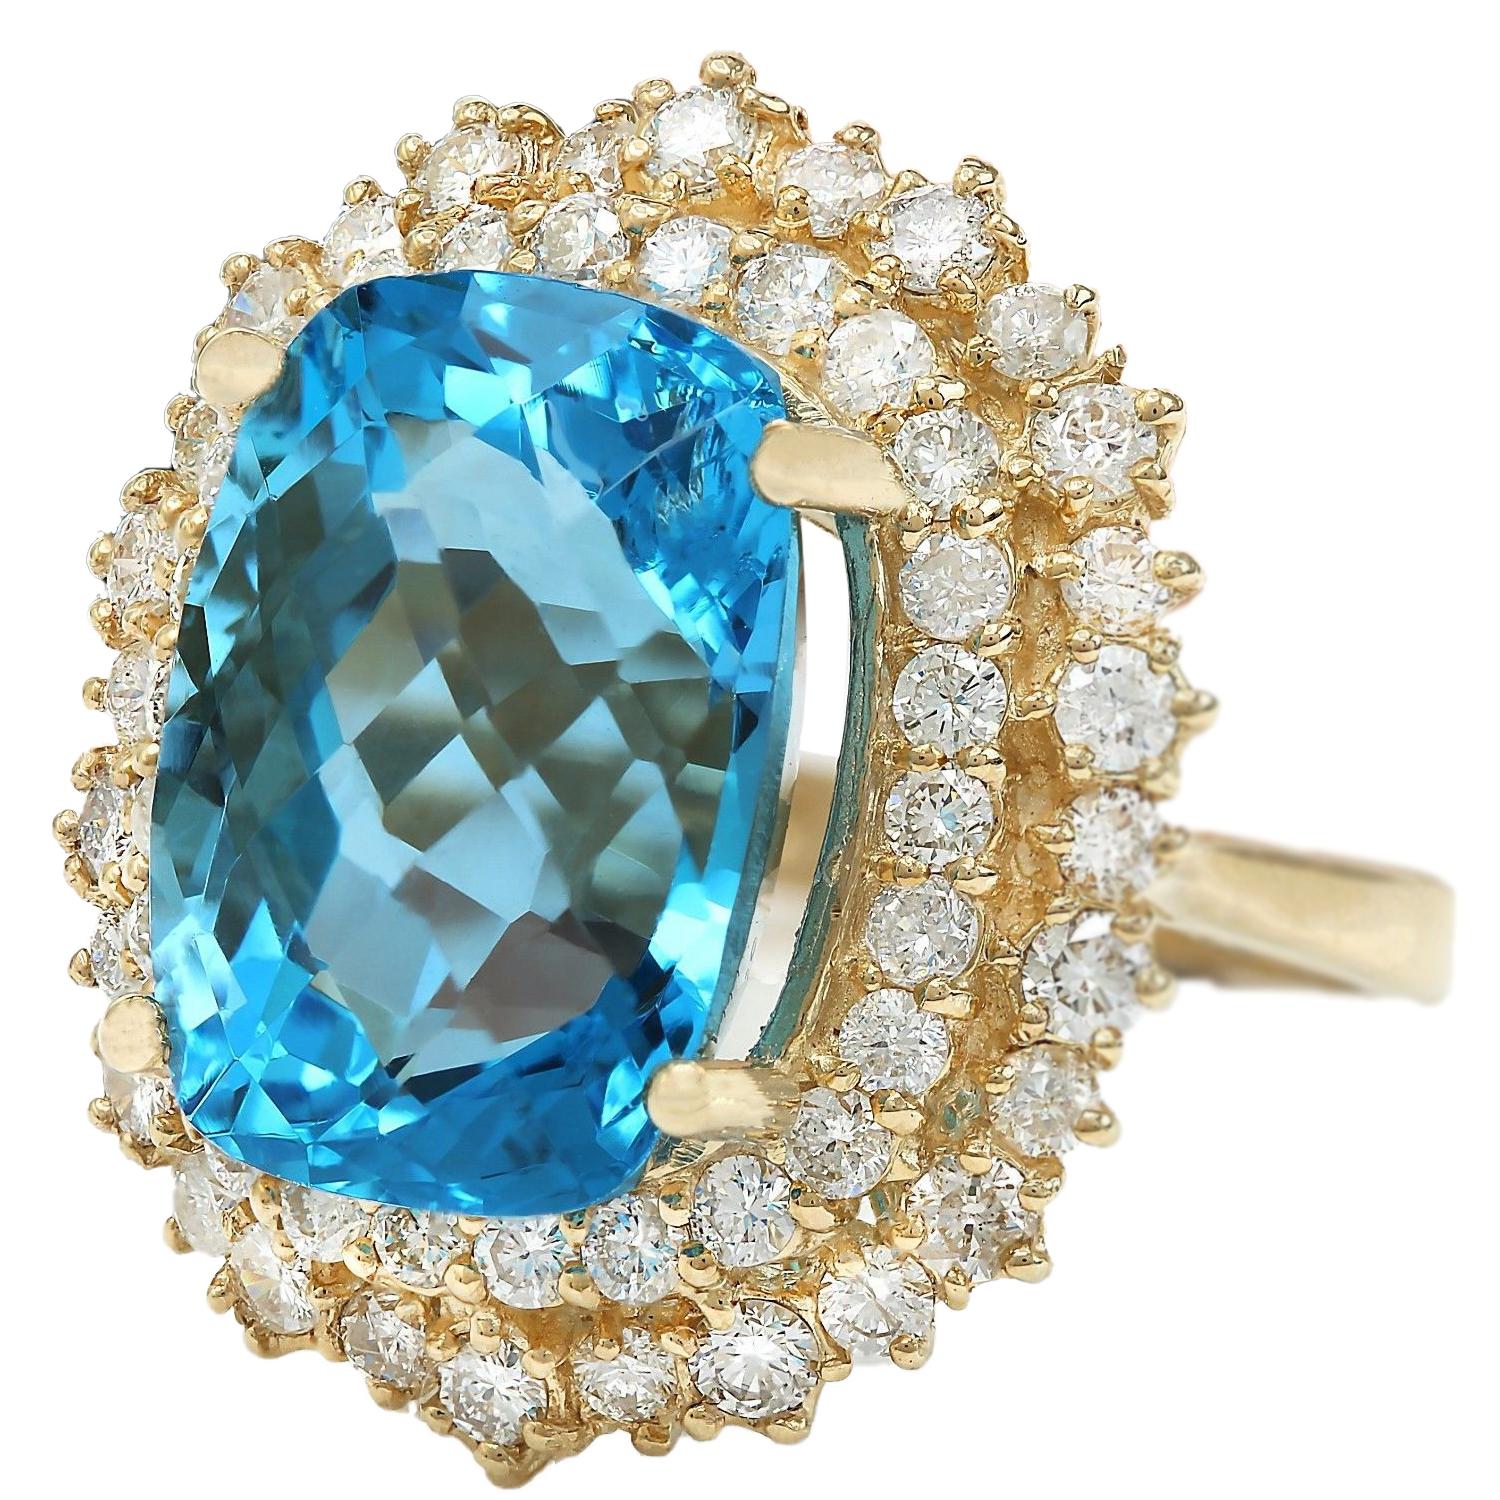 15.64 Carat Natural Topaz 14K Solid Yellow Gold Diamond Ring
 Item Type: Ring
 Item Style: Cocktail
 Material: 14K Yellow Gold
 Mainstone: Topaz
 Stone Color: Blue
 Stone Weight: 13.64 Carat
 Stone Shape: Cushion
 Stone Quantity: 1
 Stone